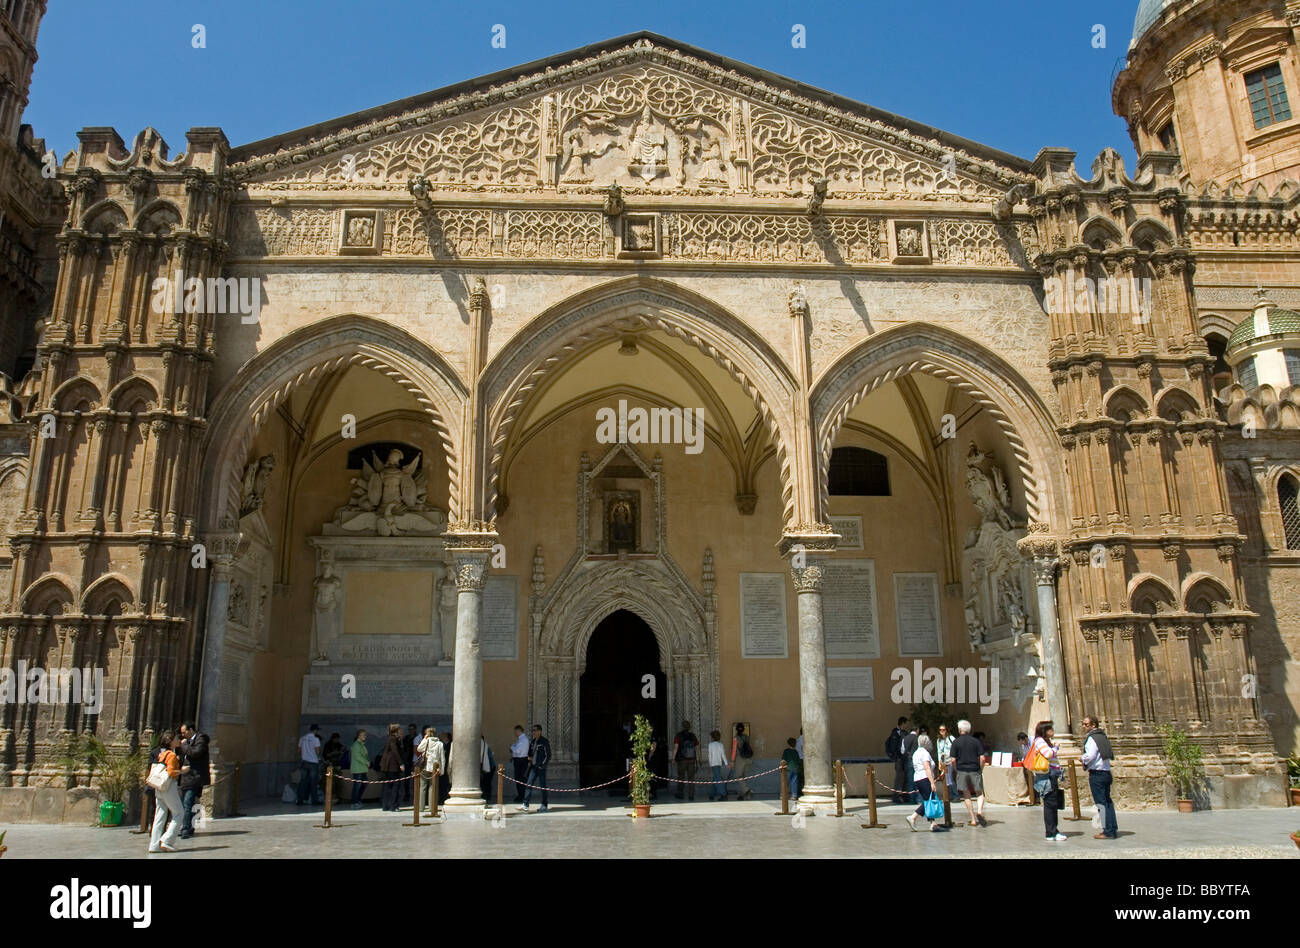 Palermo Cathedral, Piazza Cattedrale, Palermo, Sicily, Italy, Europe Stock Photo